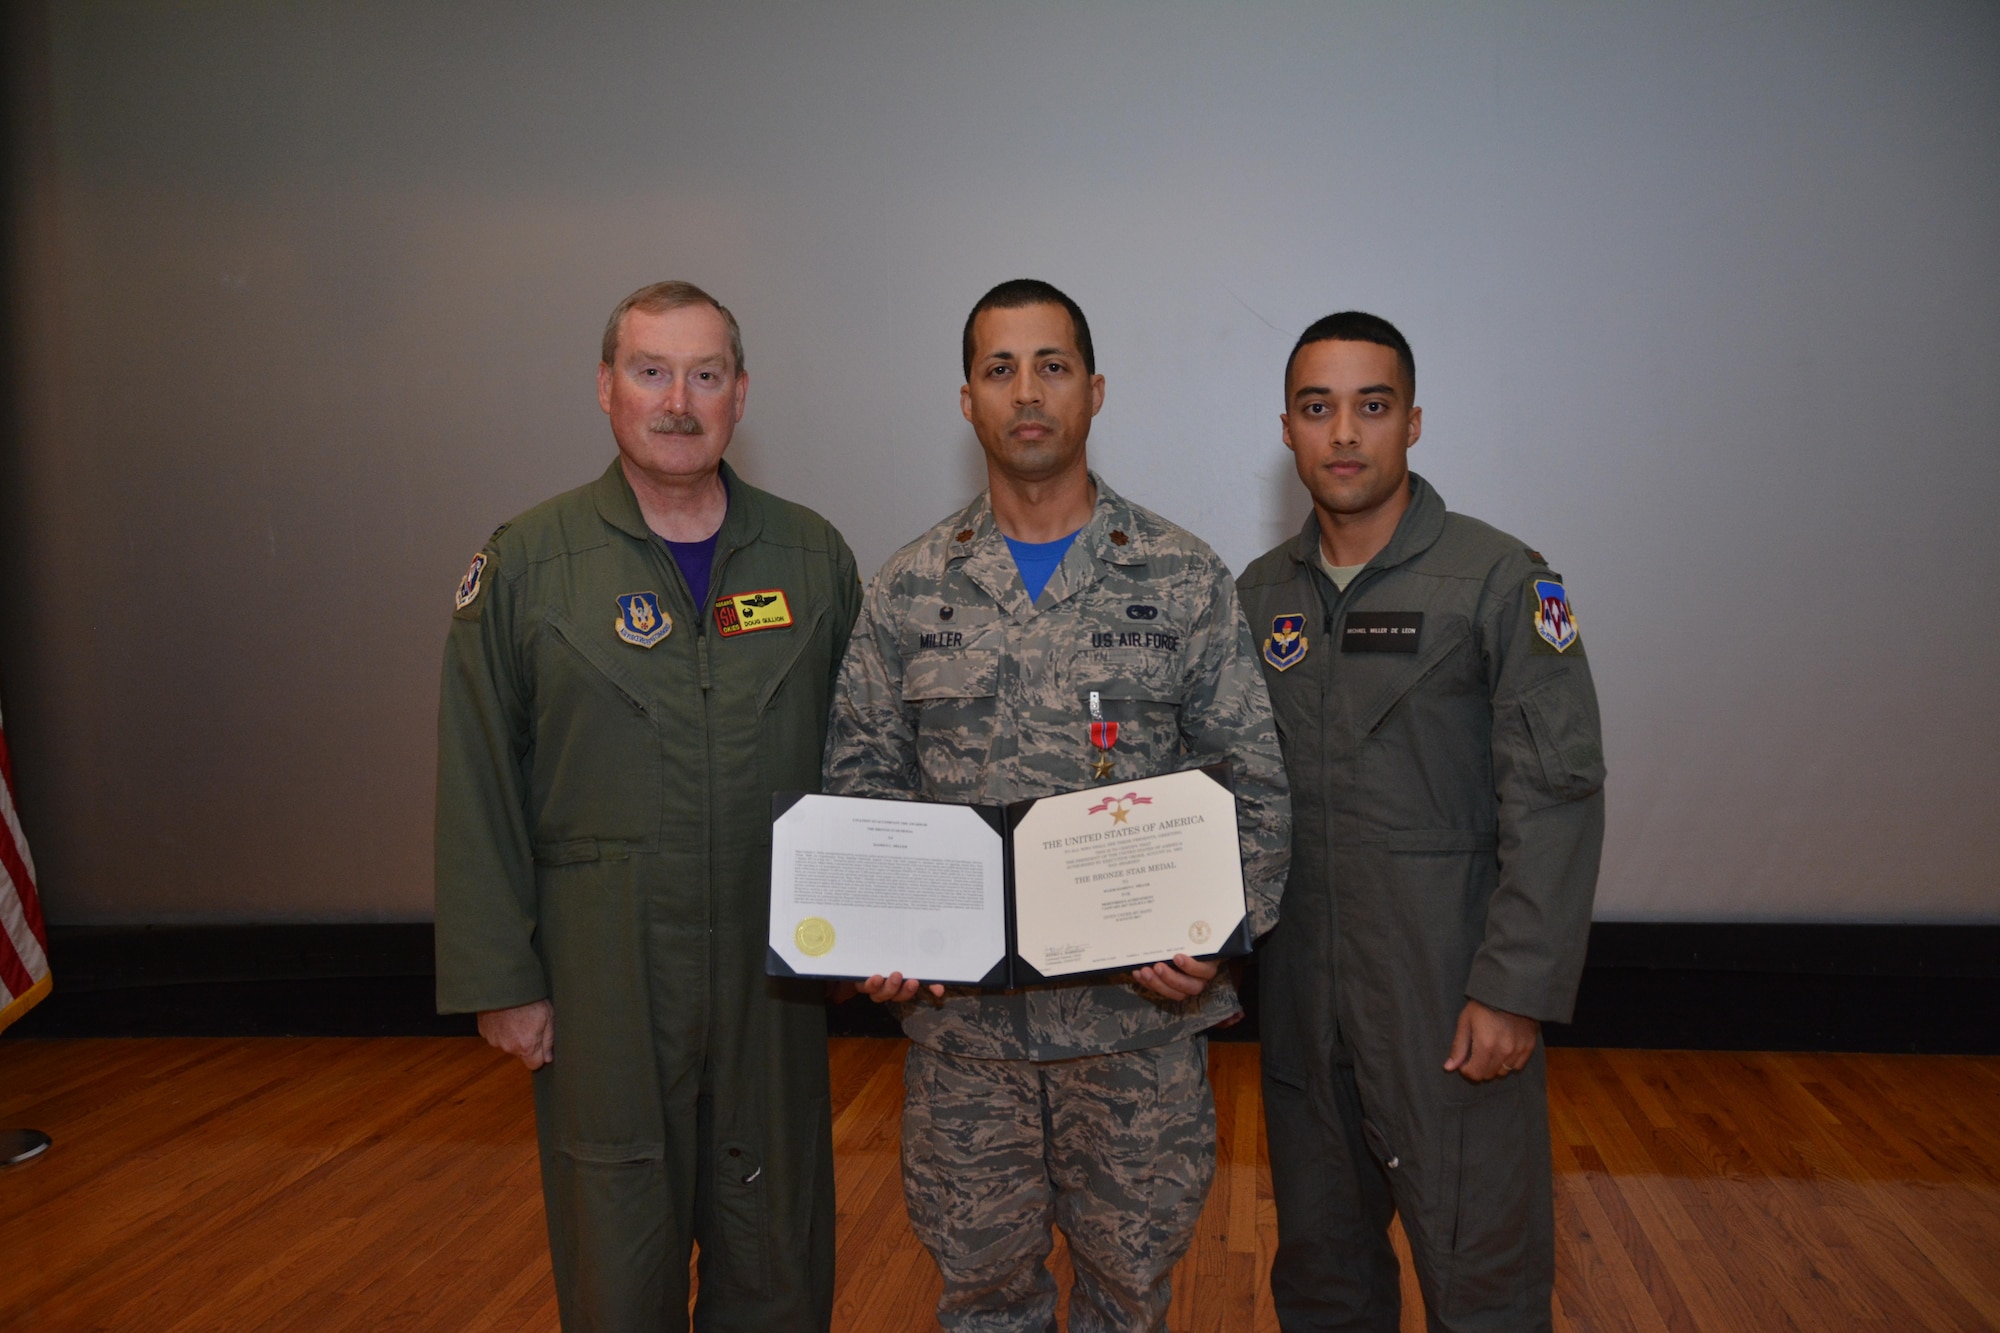 Maj. Damien Miller, (middle) 507th Logistics Readiness Squadron commander, poses with his brother, 2nd Lt. Michael Miller (right) and Col. Doug Gullion, 507th Air Refueling Wing commander, during a Bronze Star Medal presentation here, Nov. 5, 2017.  Maj. Miller received the medal for meritorious service in Iraq from Jan. 7 to July 8, 2017, while serving as the 442nd Air Expeditionary Squadron commander. Miller was responsible for: Logistics, materiel management, vehicle management, transportation, traffic management and aerial port operations. Additionally, Miller commanded six geographically separated units while exposed to extreme danger from hostile rocket and mortar attacks and credible threats from improvised explosive devices. (U.S. Air Force Photo/Tech Sgt. Samantha Mathison)